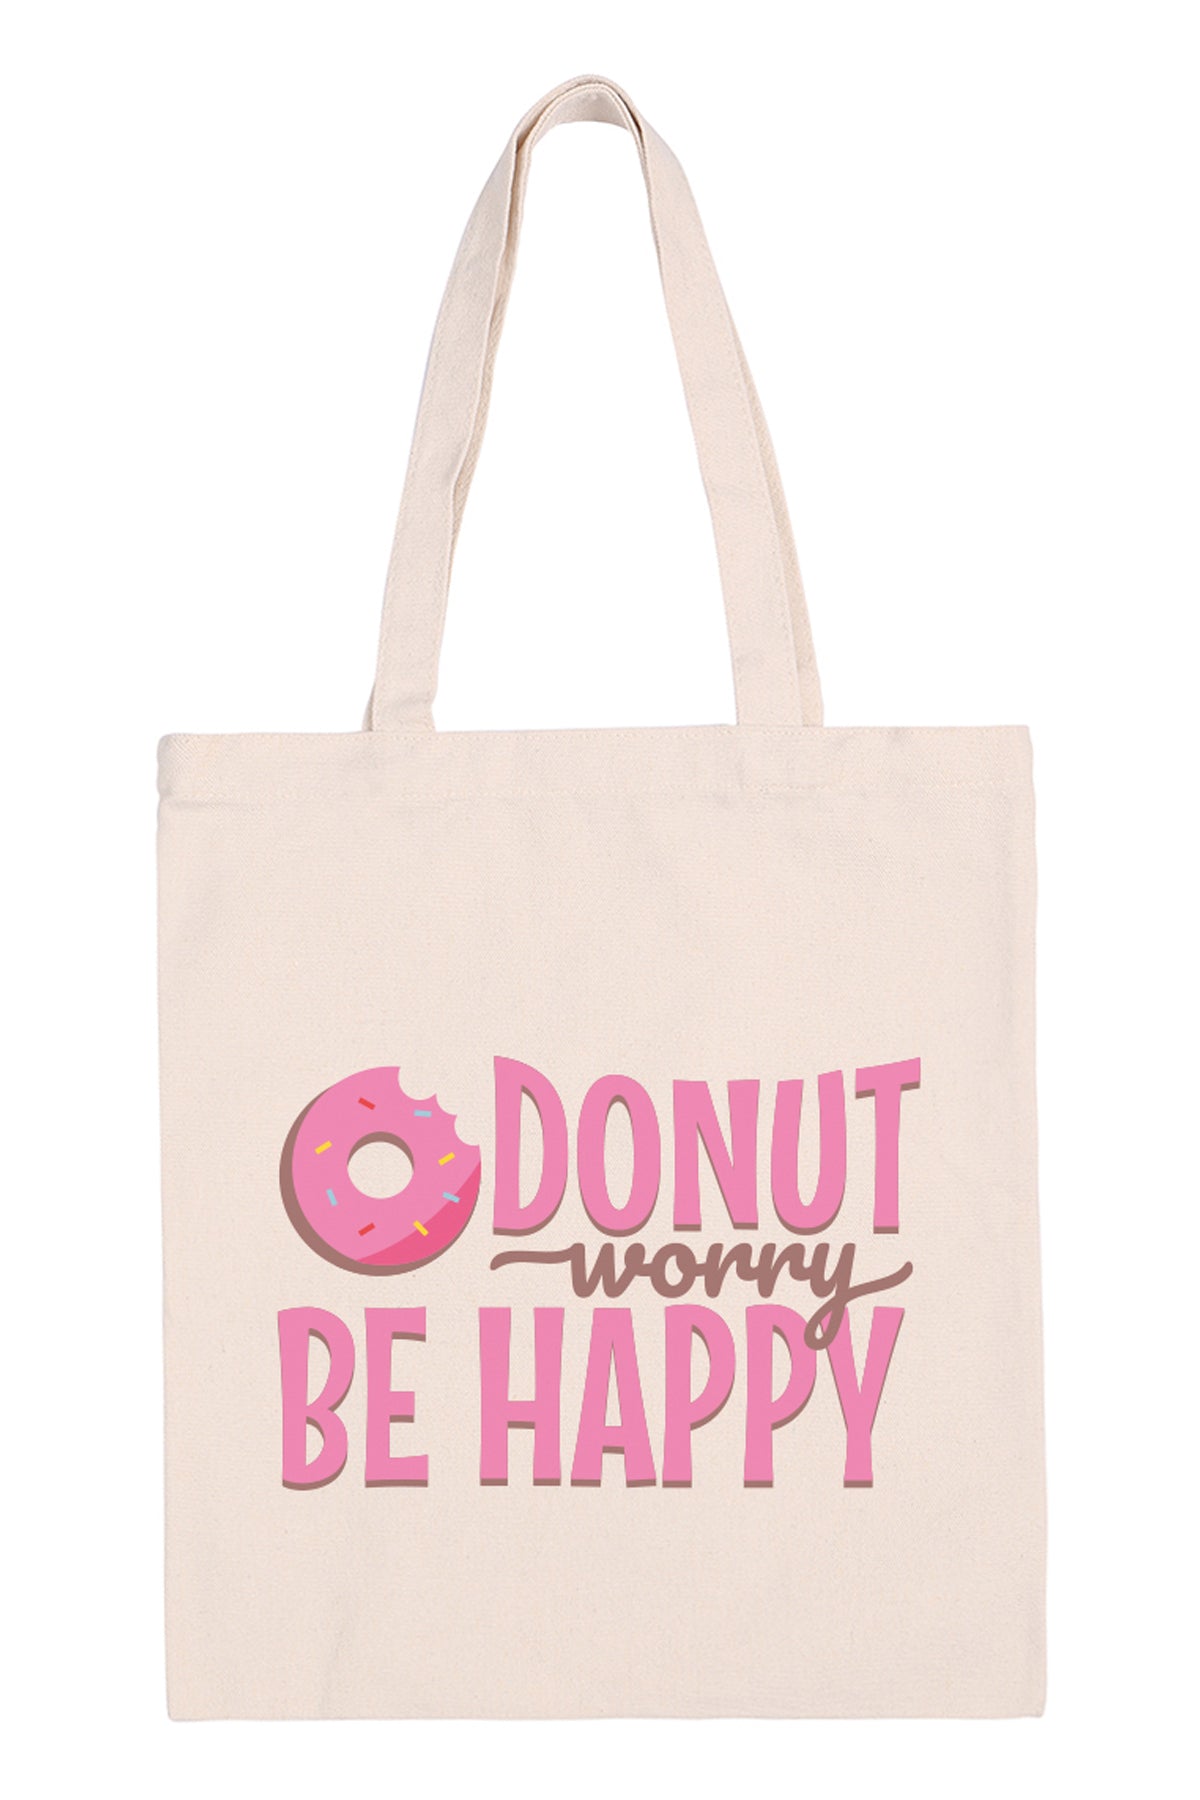 DONUT WORRY BE HAPPY PRINT TOTE BAG